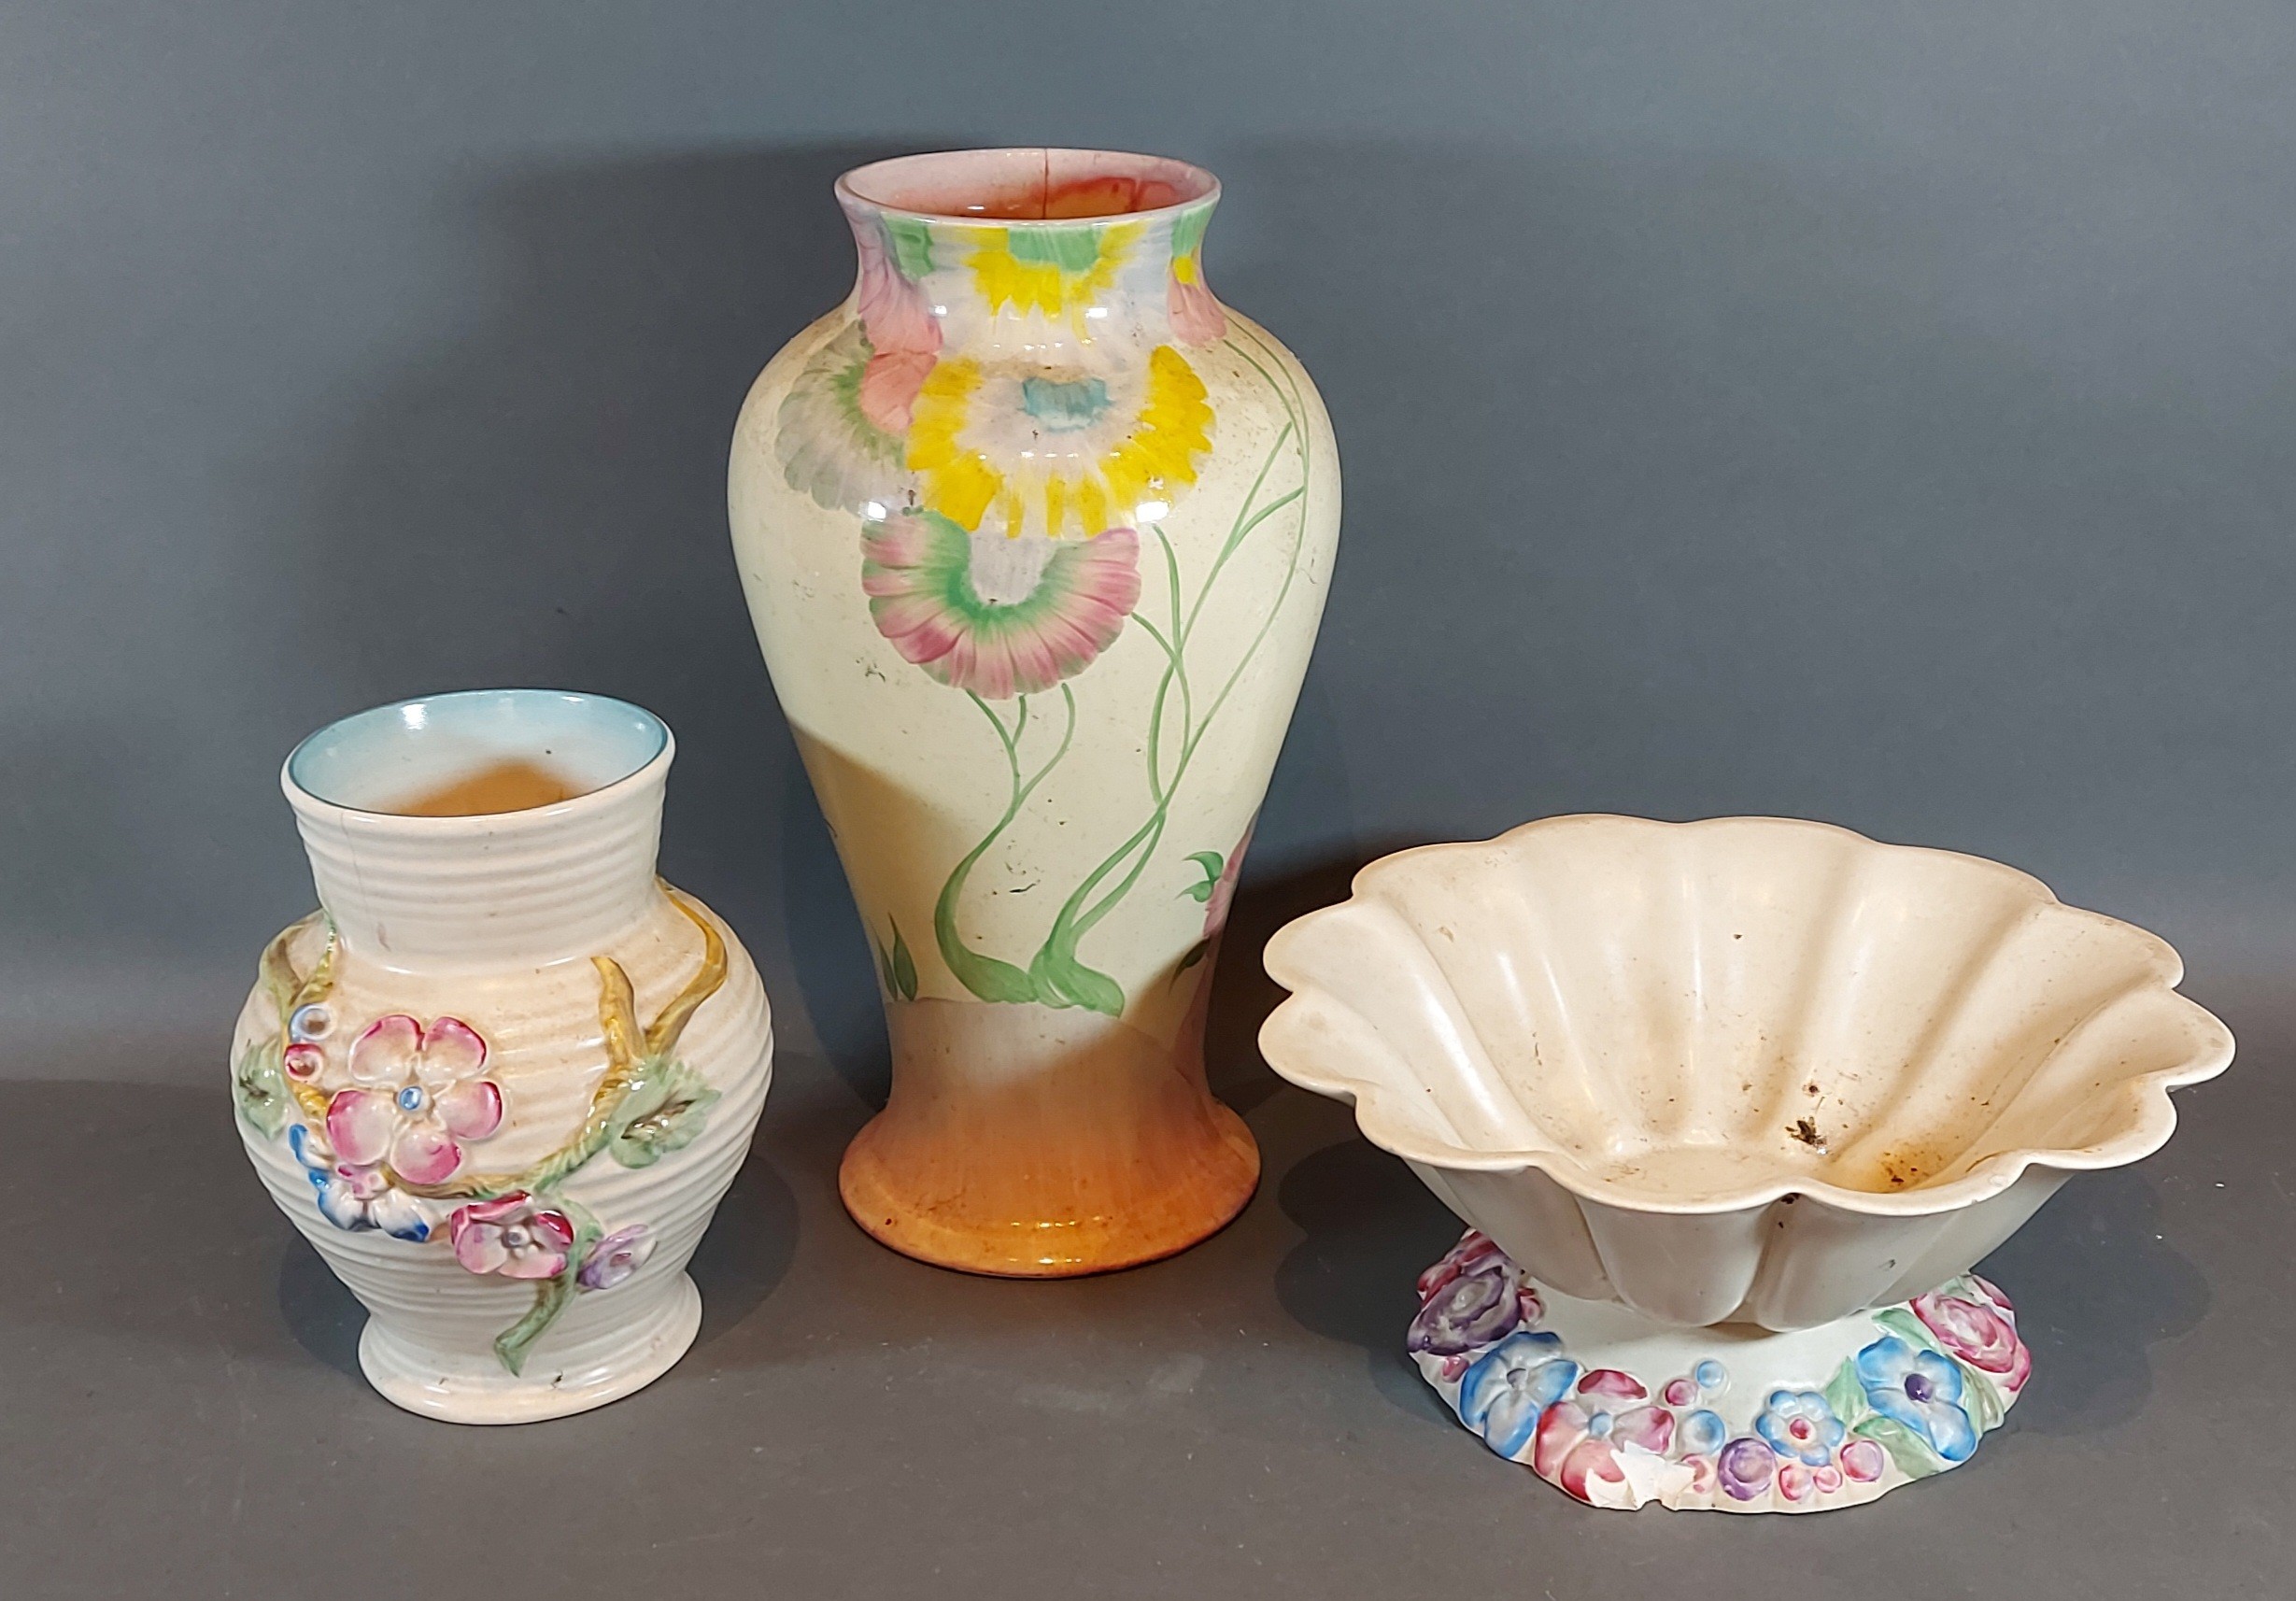 A Clarice Cliff Pink Pearls pattern vase, 30cms tall together with a Clarice Cliff bowl and